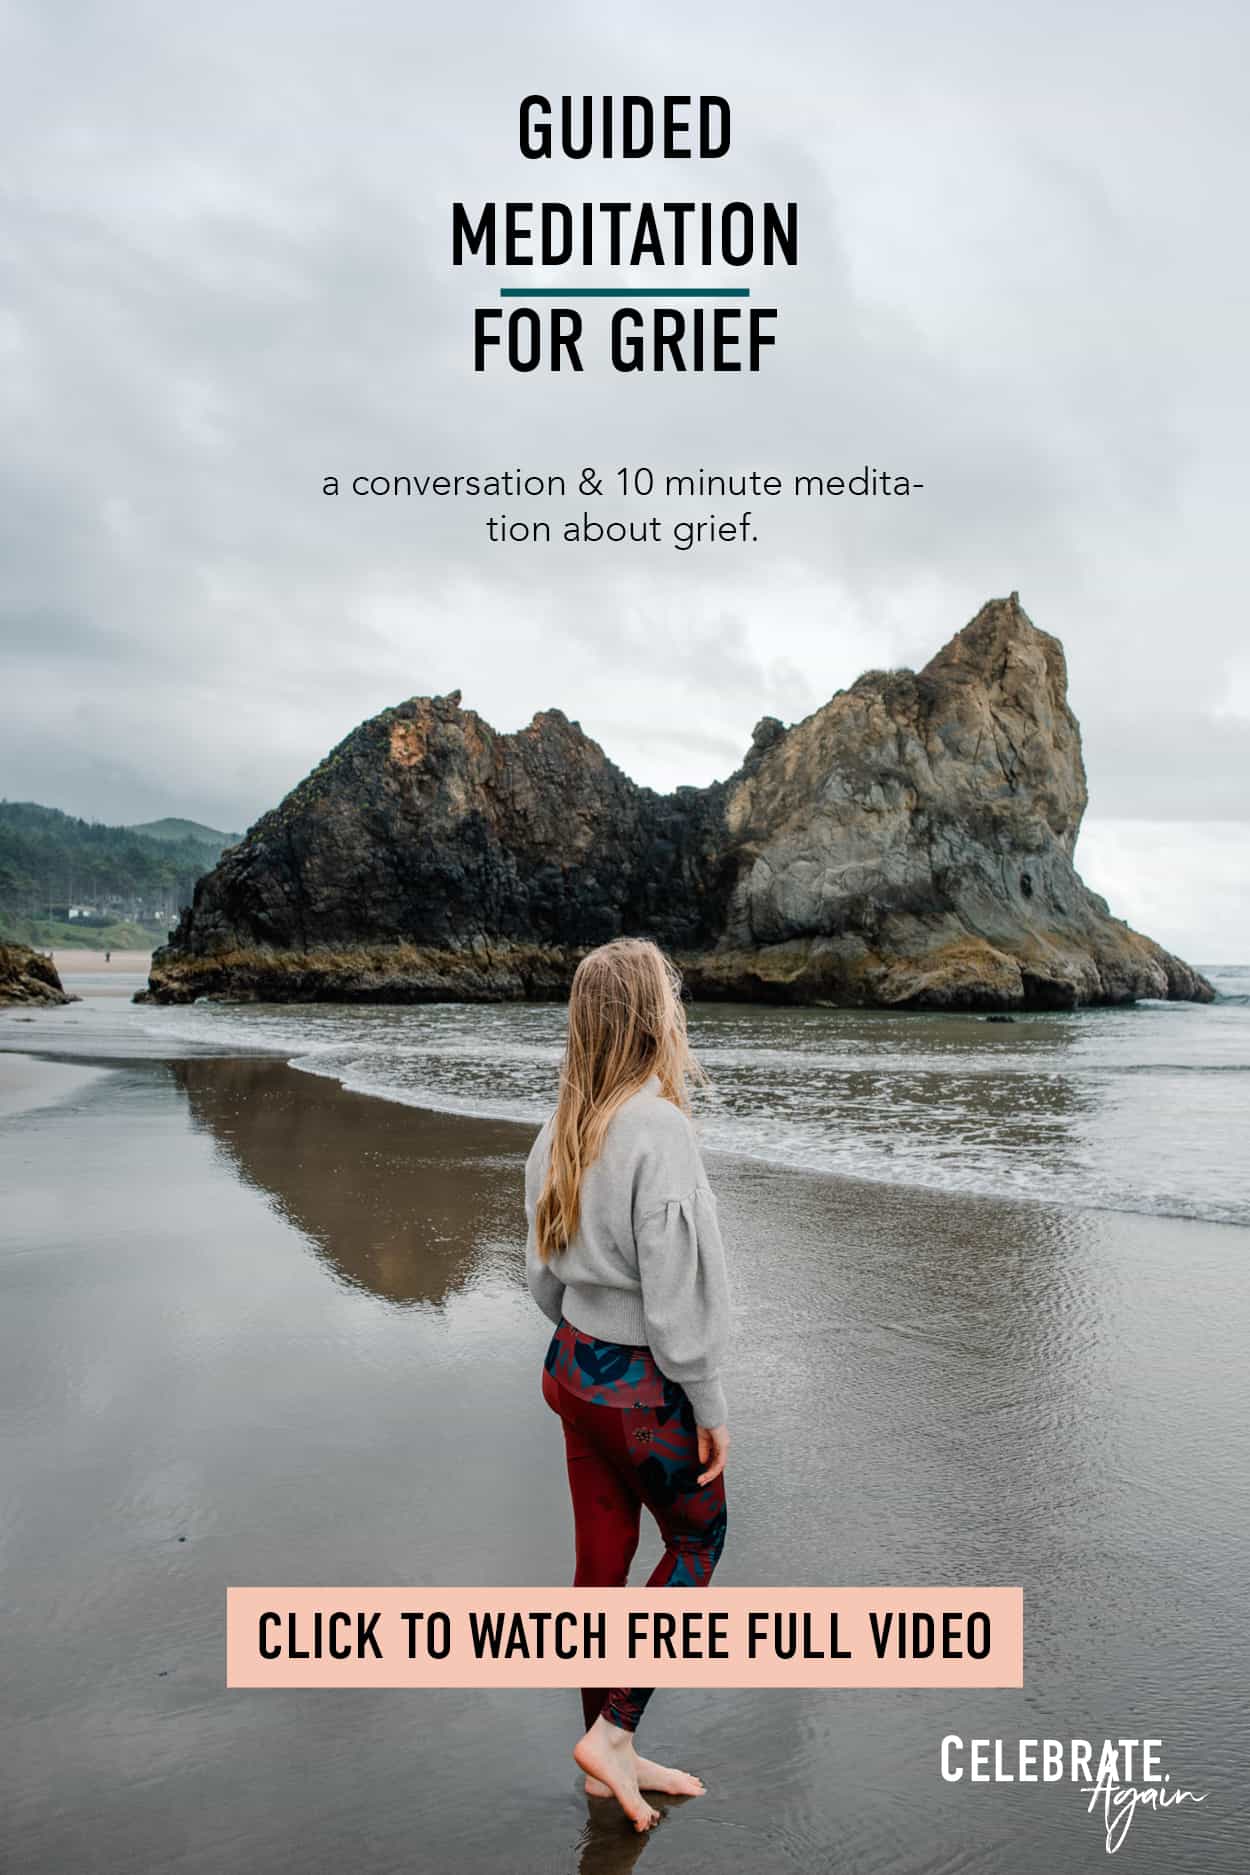 "guided meditation for grief and talk click to watch woman strains on beach with sea rock in background